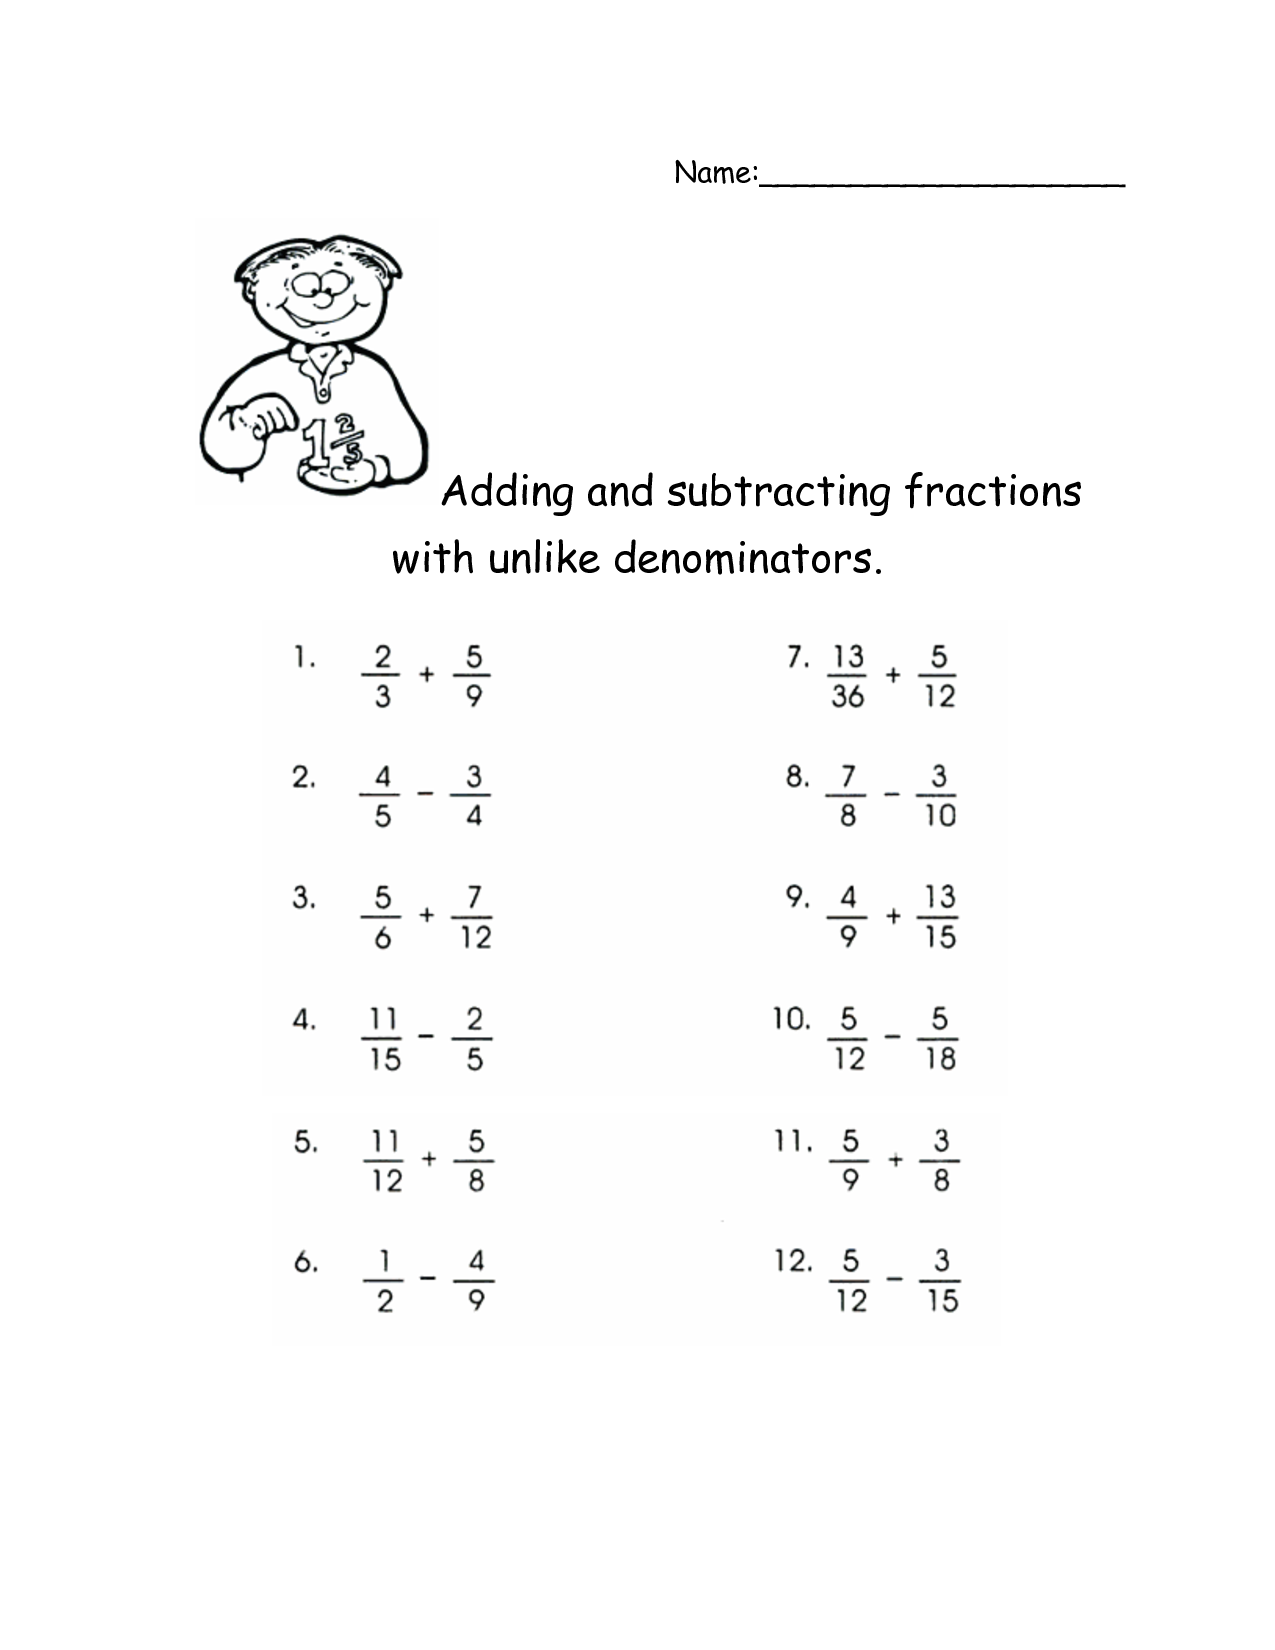 homework 5 adding and subtracting fractions with unlike bases